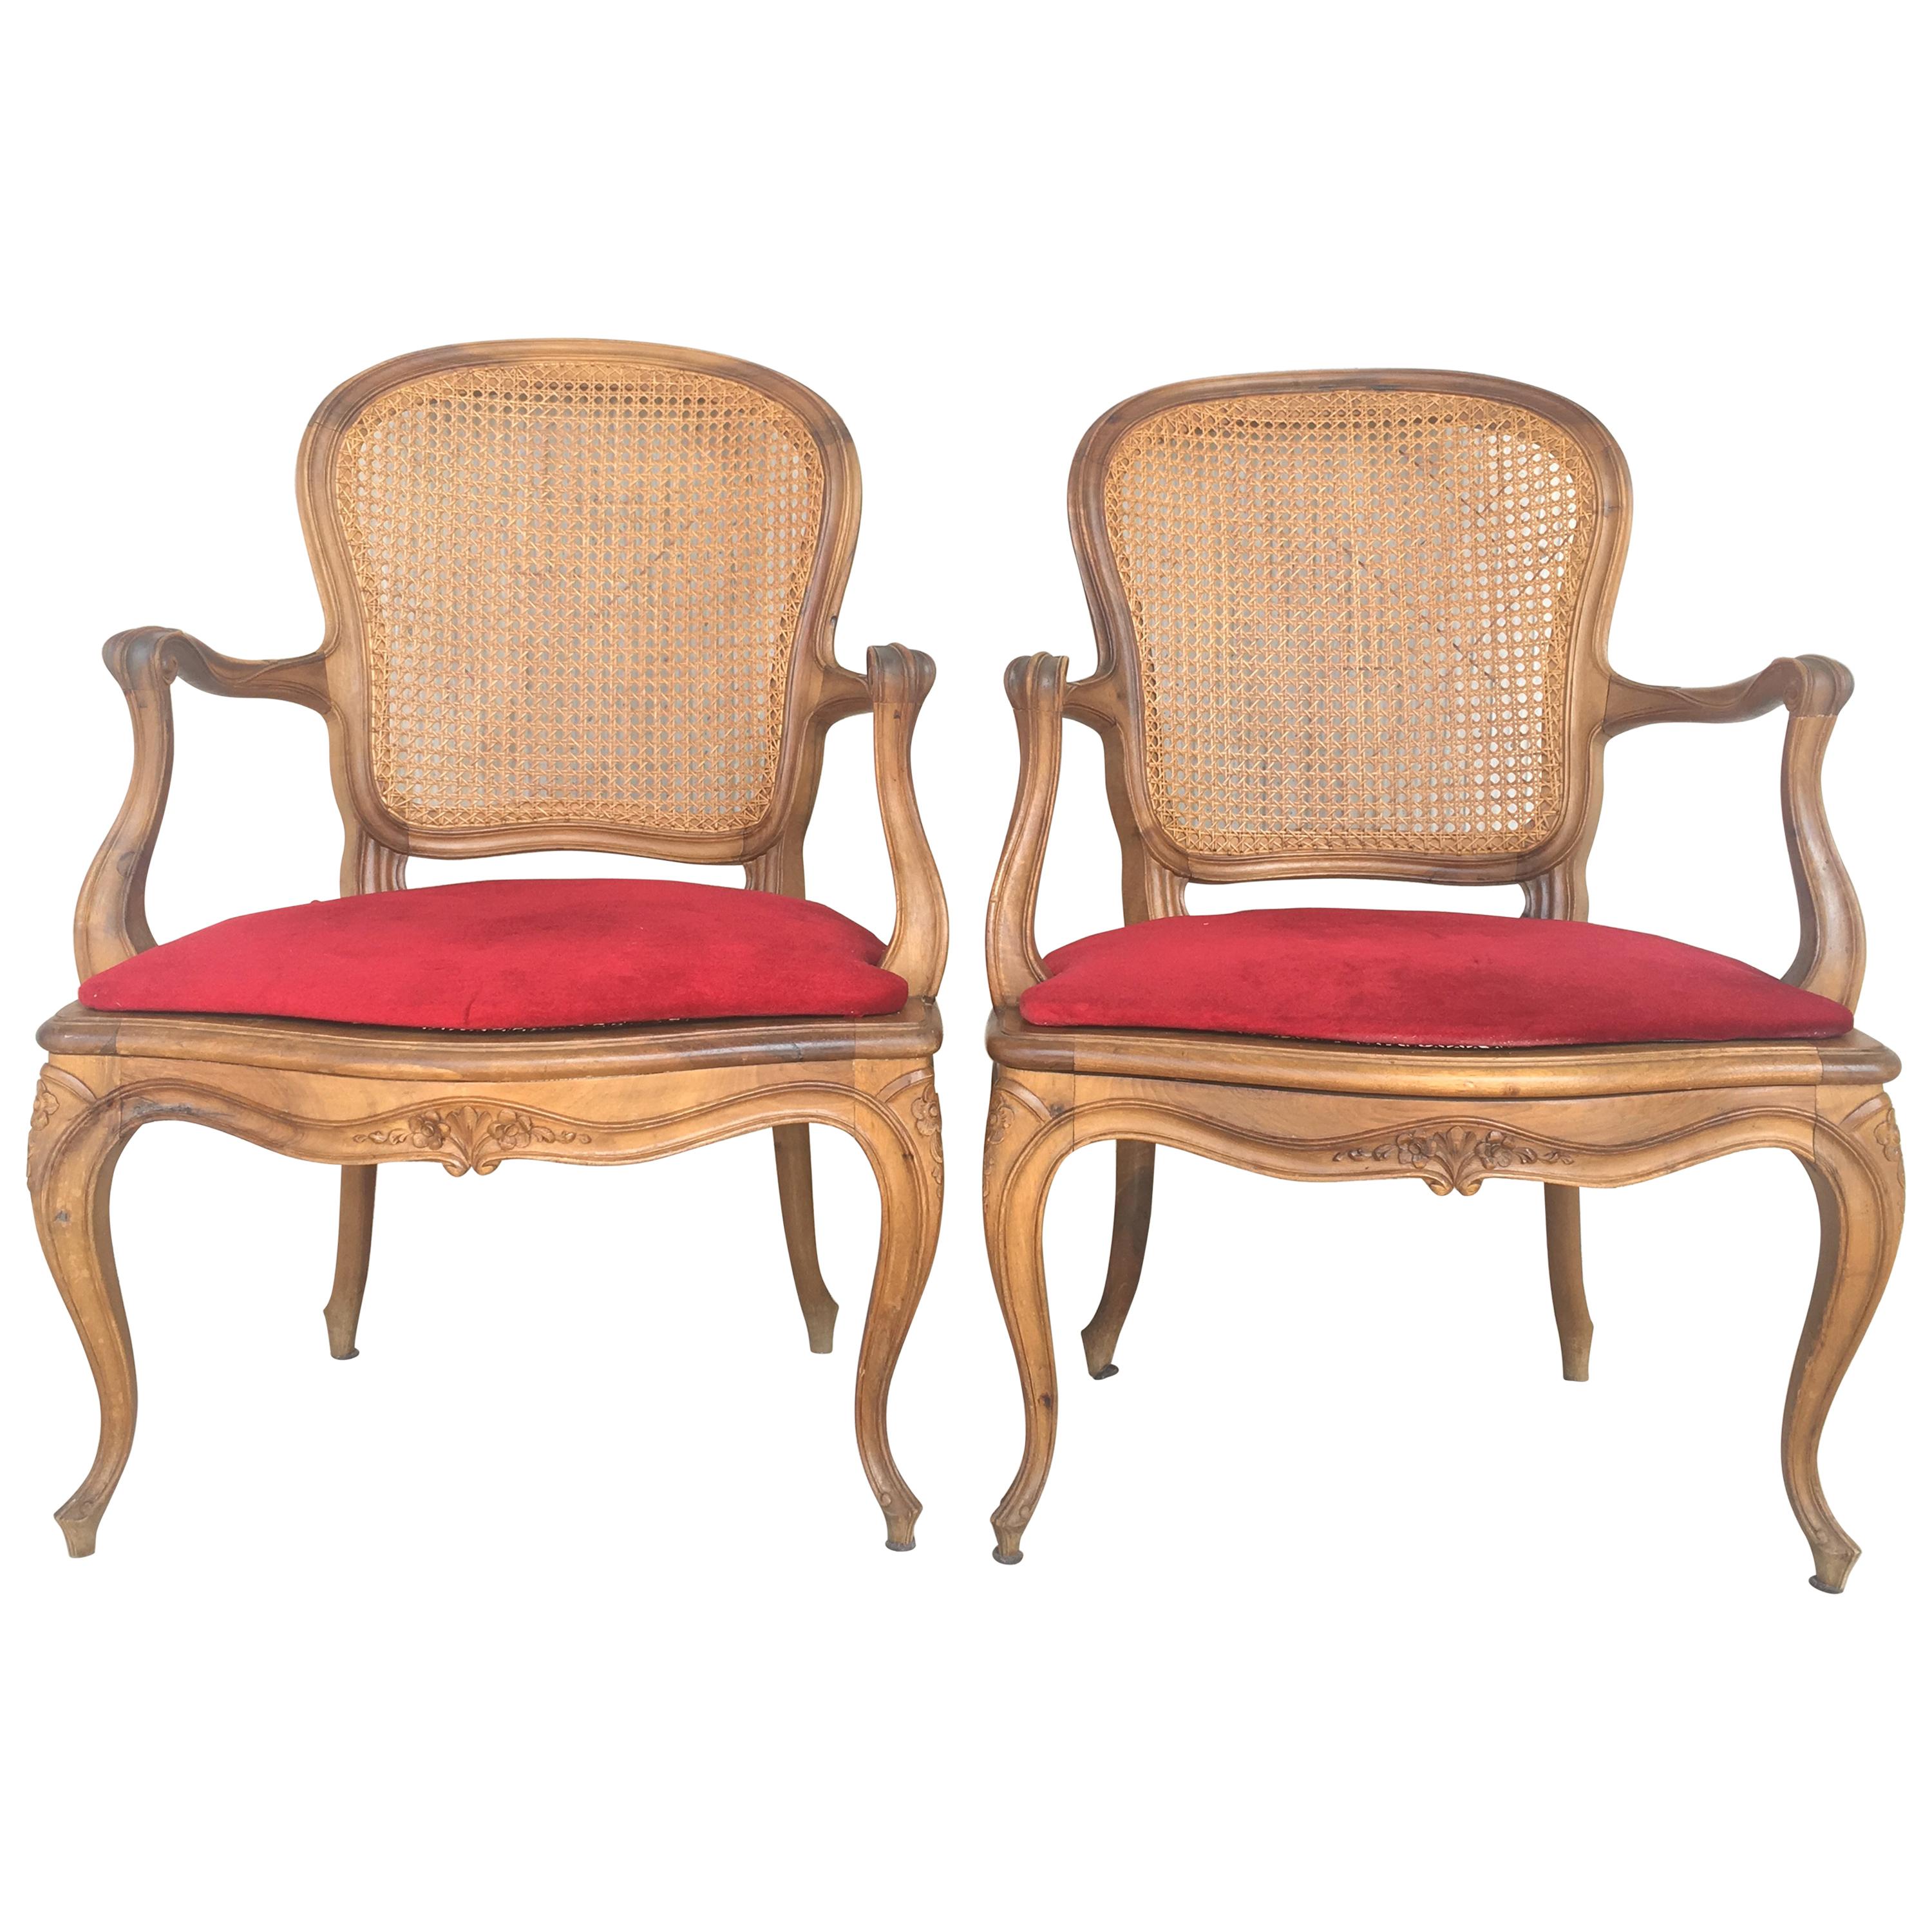 Pair of Louis XV carved Provincial Fauteil's with caned seats and backrests with velvet upholstered rigid cushions-seats, carved crests, rails, arms, and legs.
Really beautiful and perfect shape.

ONLY ONE AVAILABLE